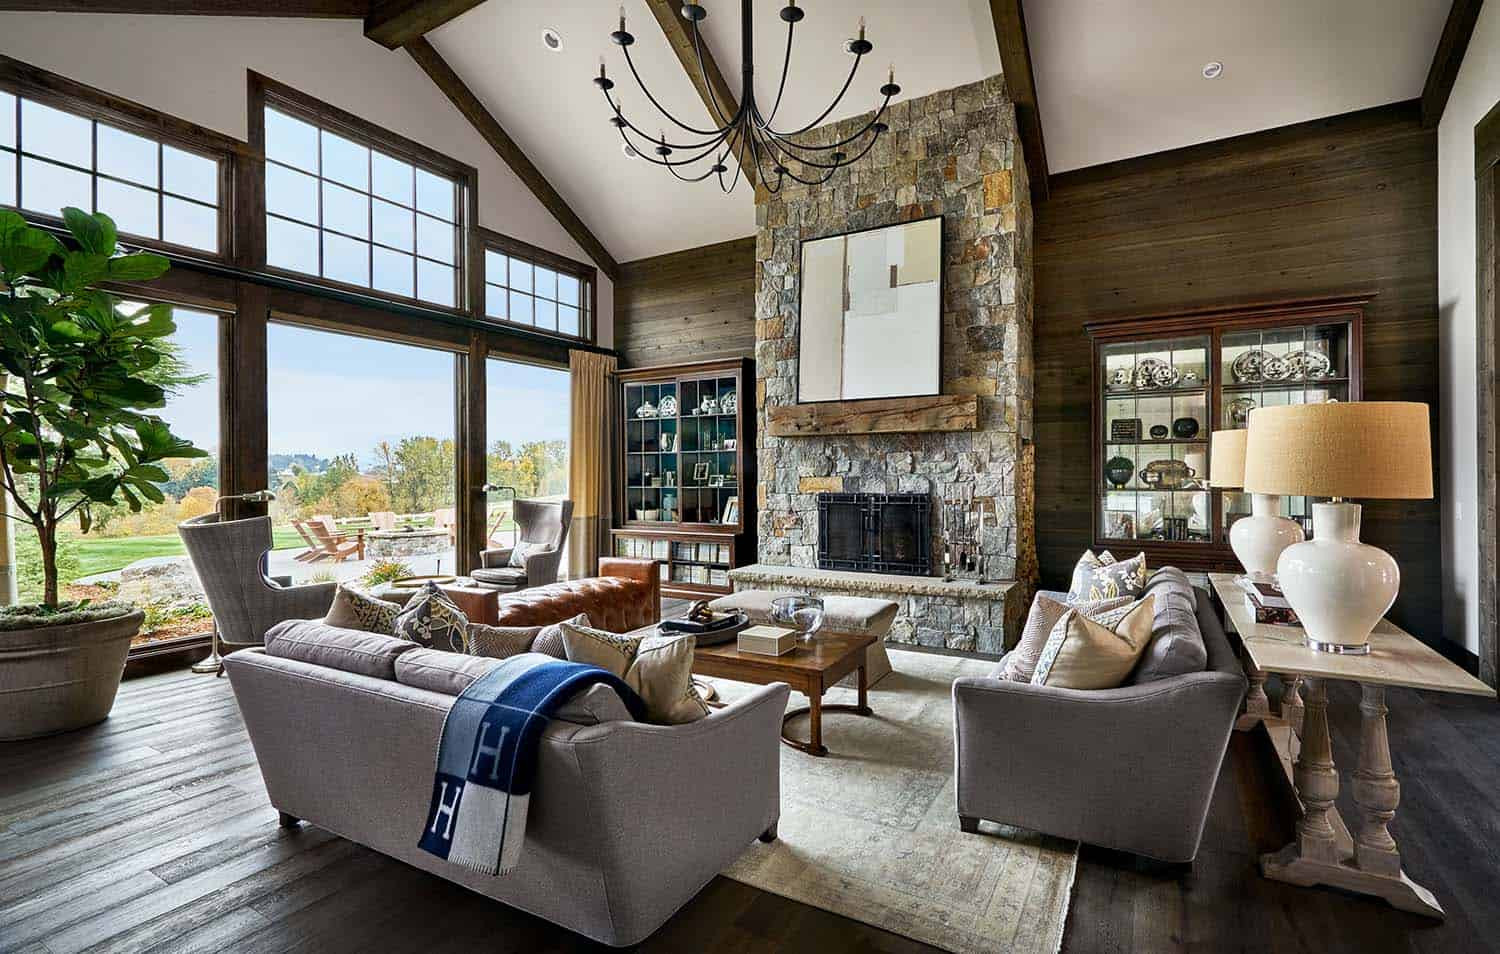 Modern Rustic Living Room
 Contemporary rustic farmhouse with stunning living spaces